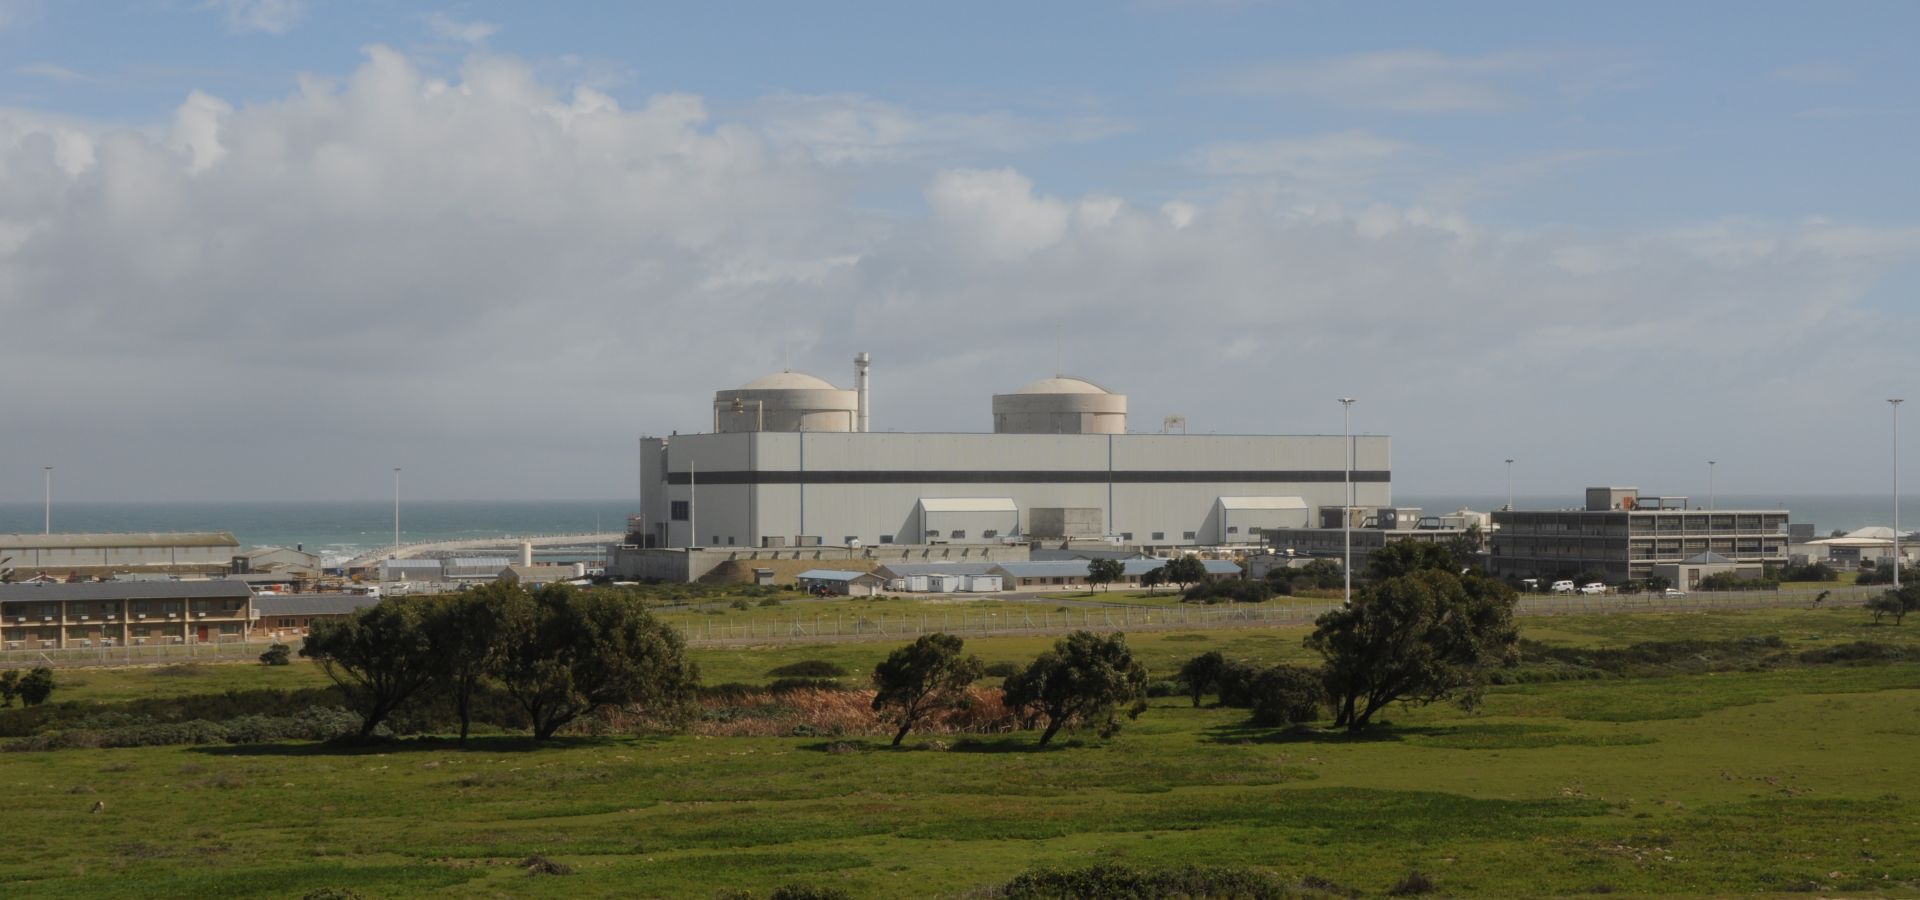 koeberg nuclear power plant with blue skies